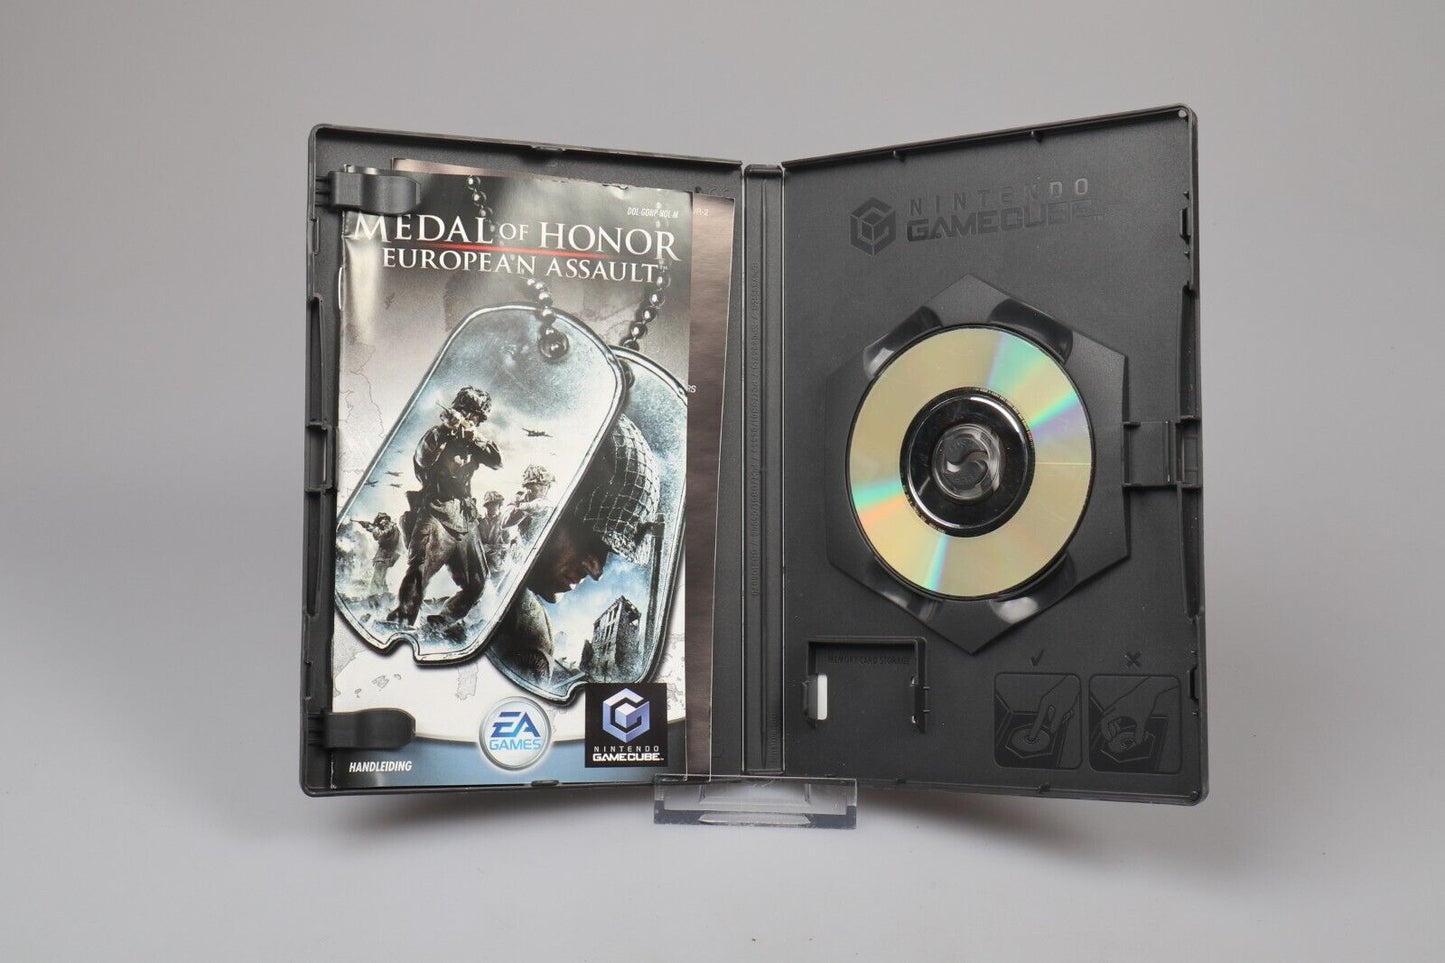 GameCube | Medal of Honor: Europese aanval (PAL) (HOL)